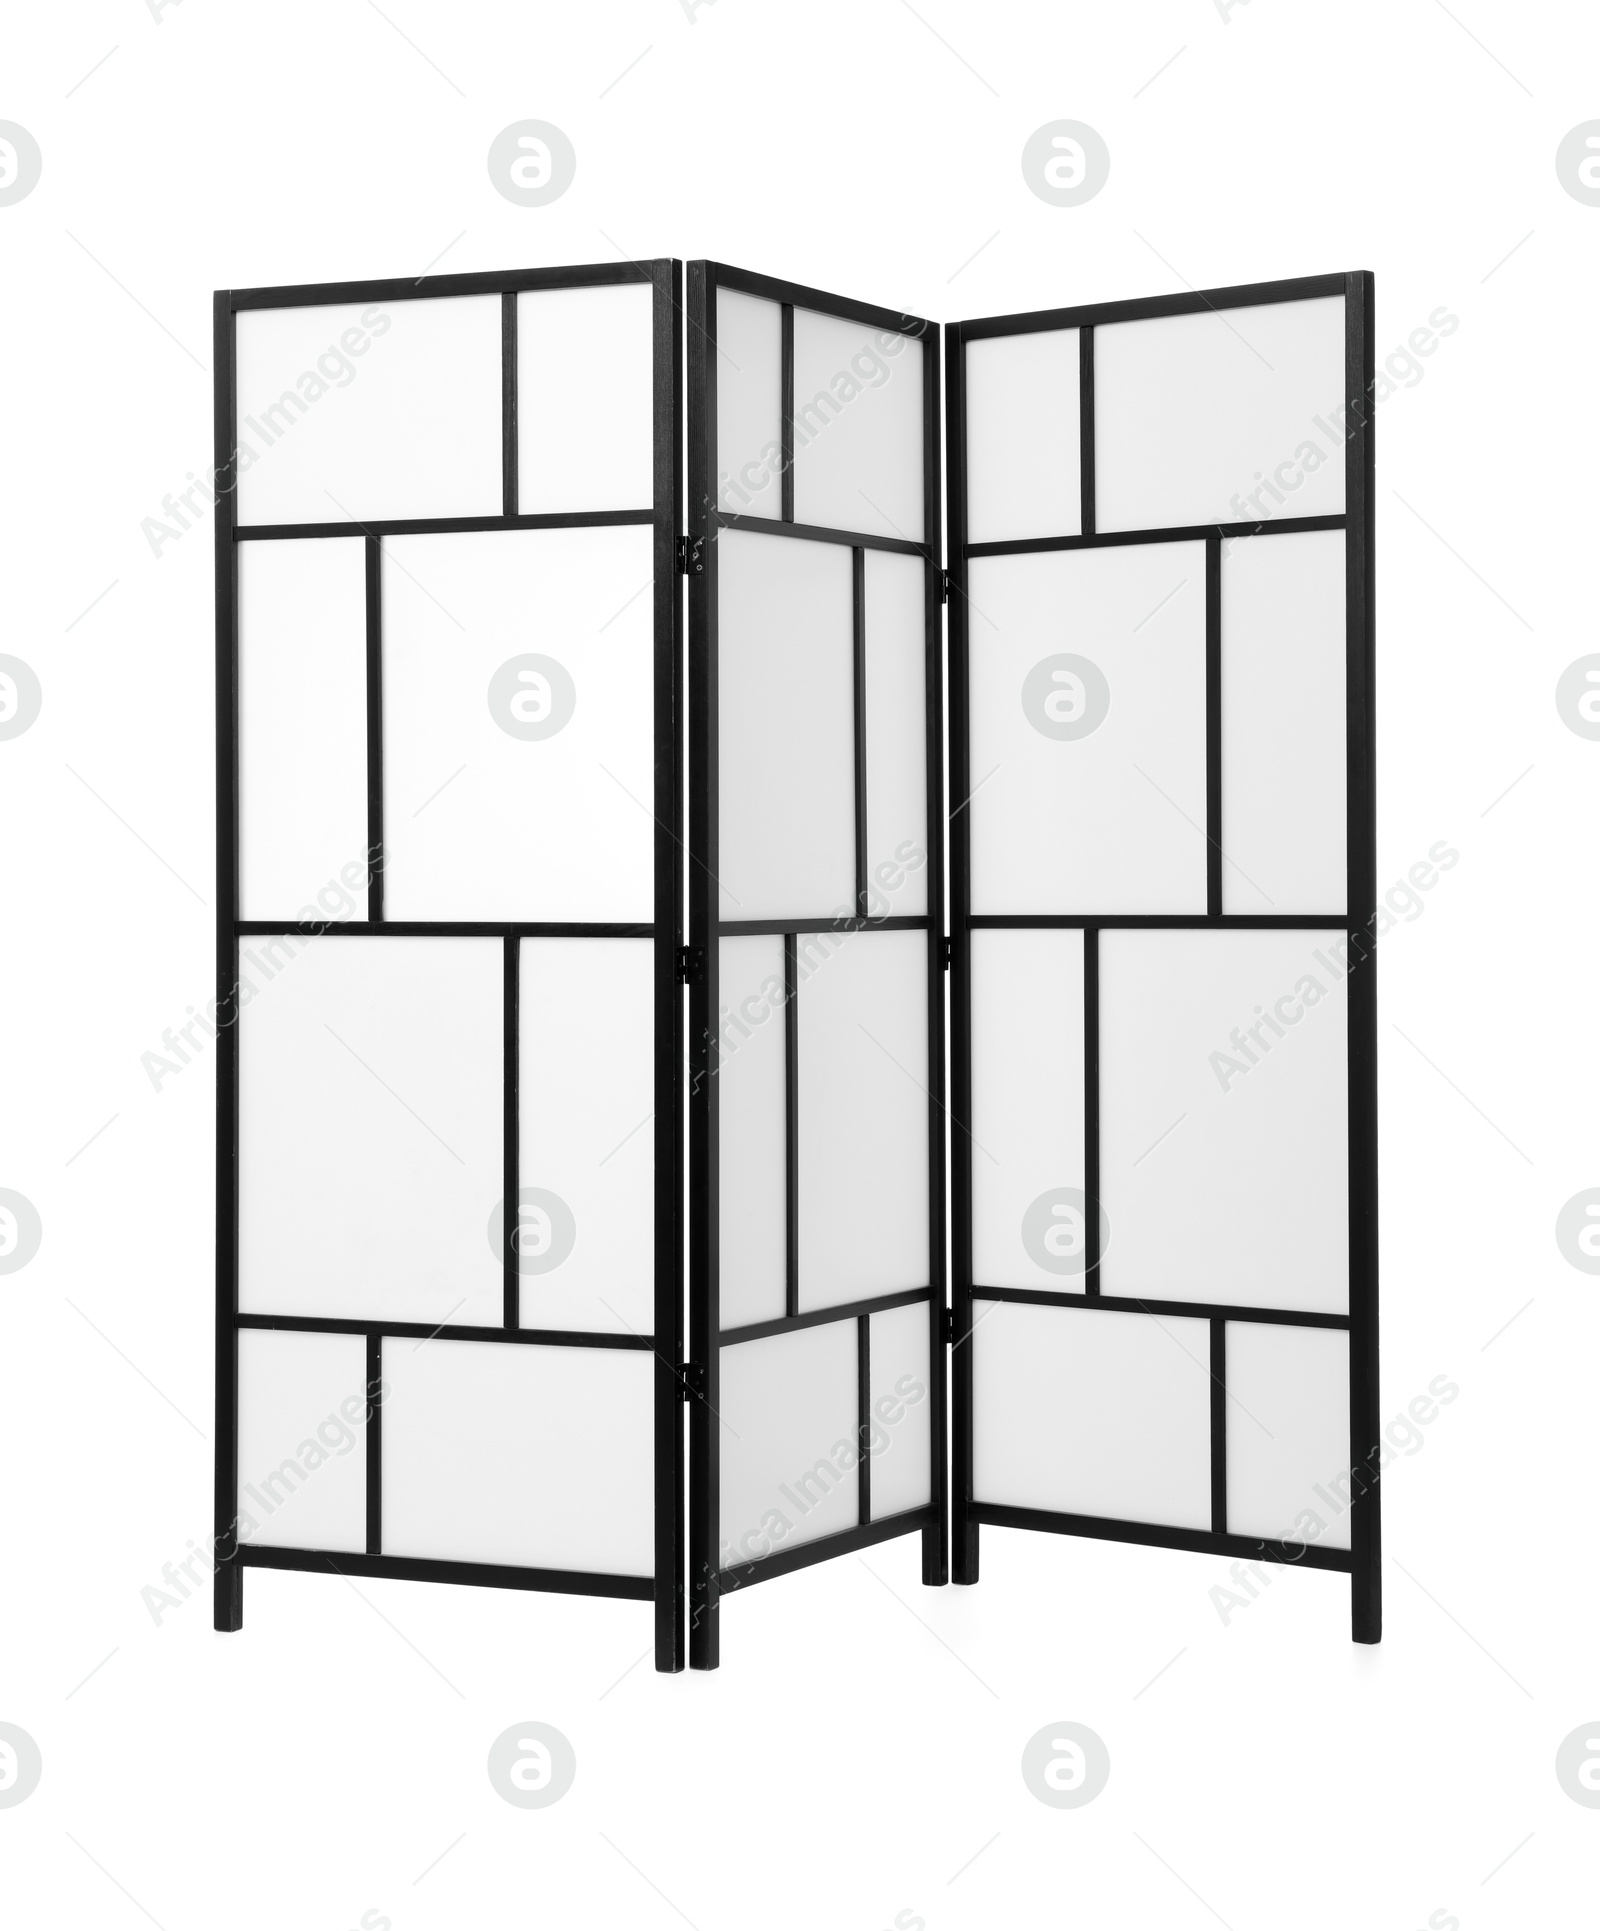 Photo of Folding screen isolated on white. Interior element